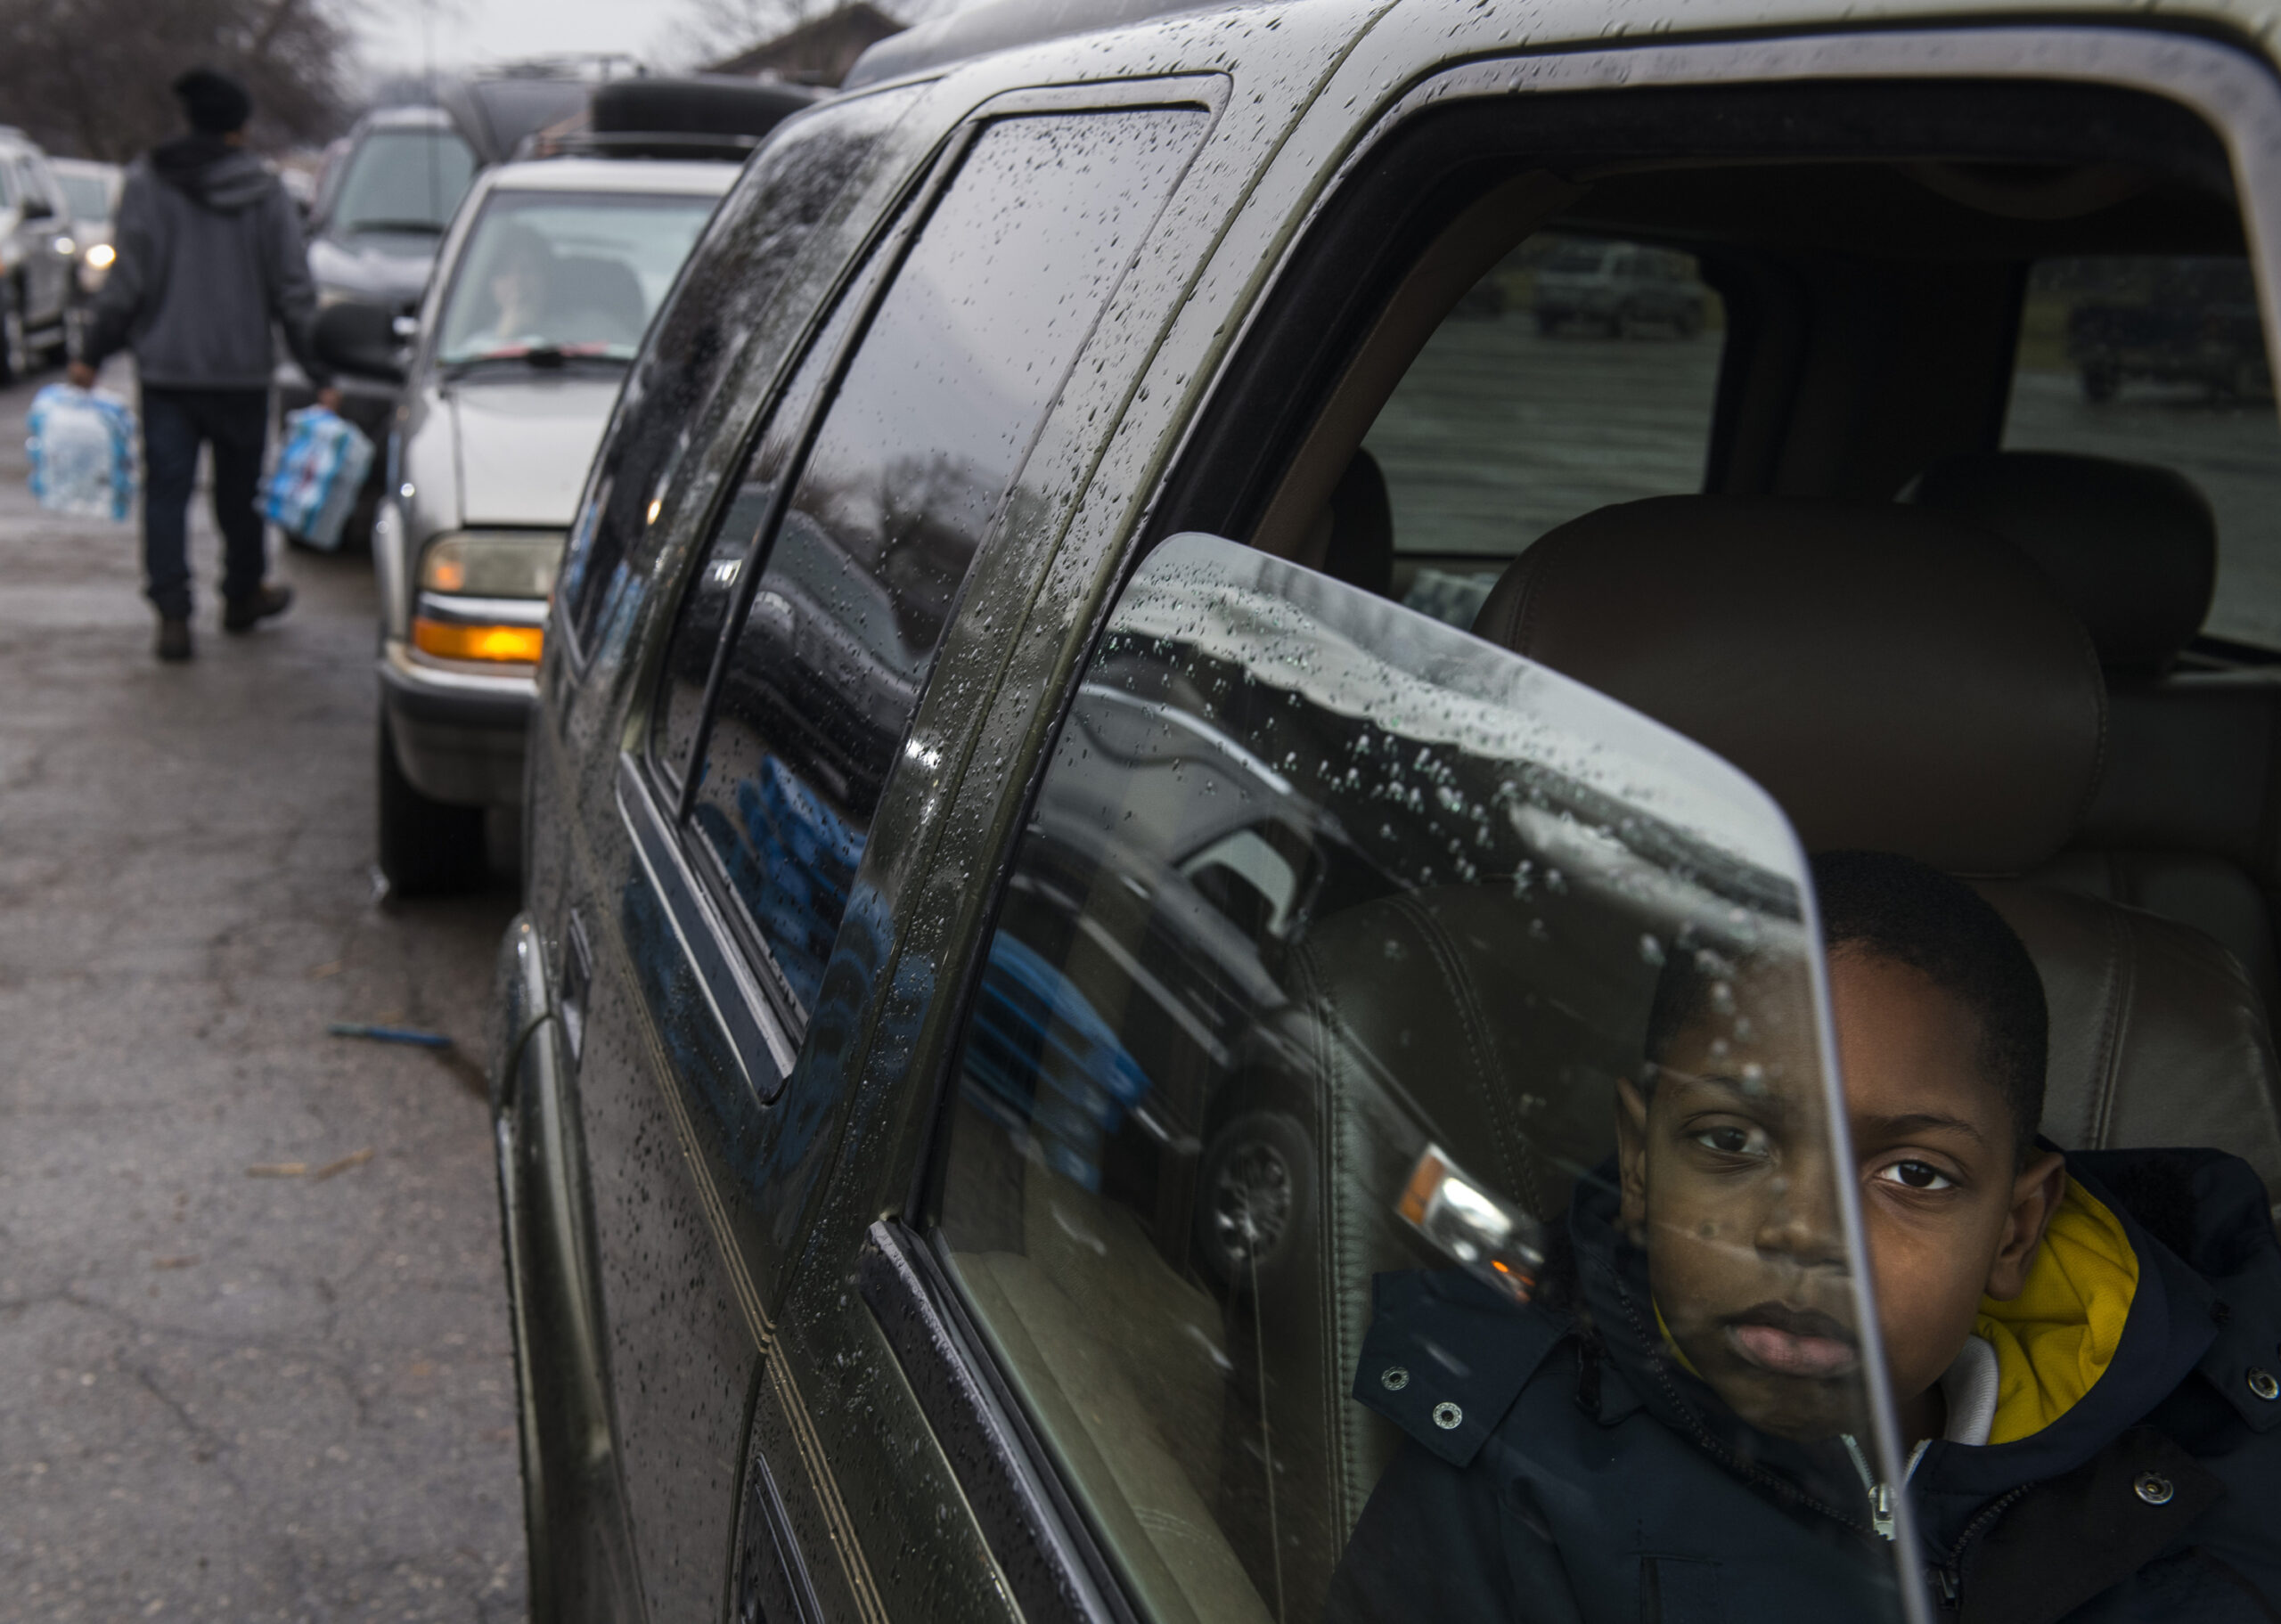 Side view of a car looking into the front passenger seat where a child in a blue coat is looking at the camera.